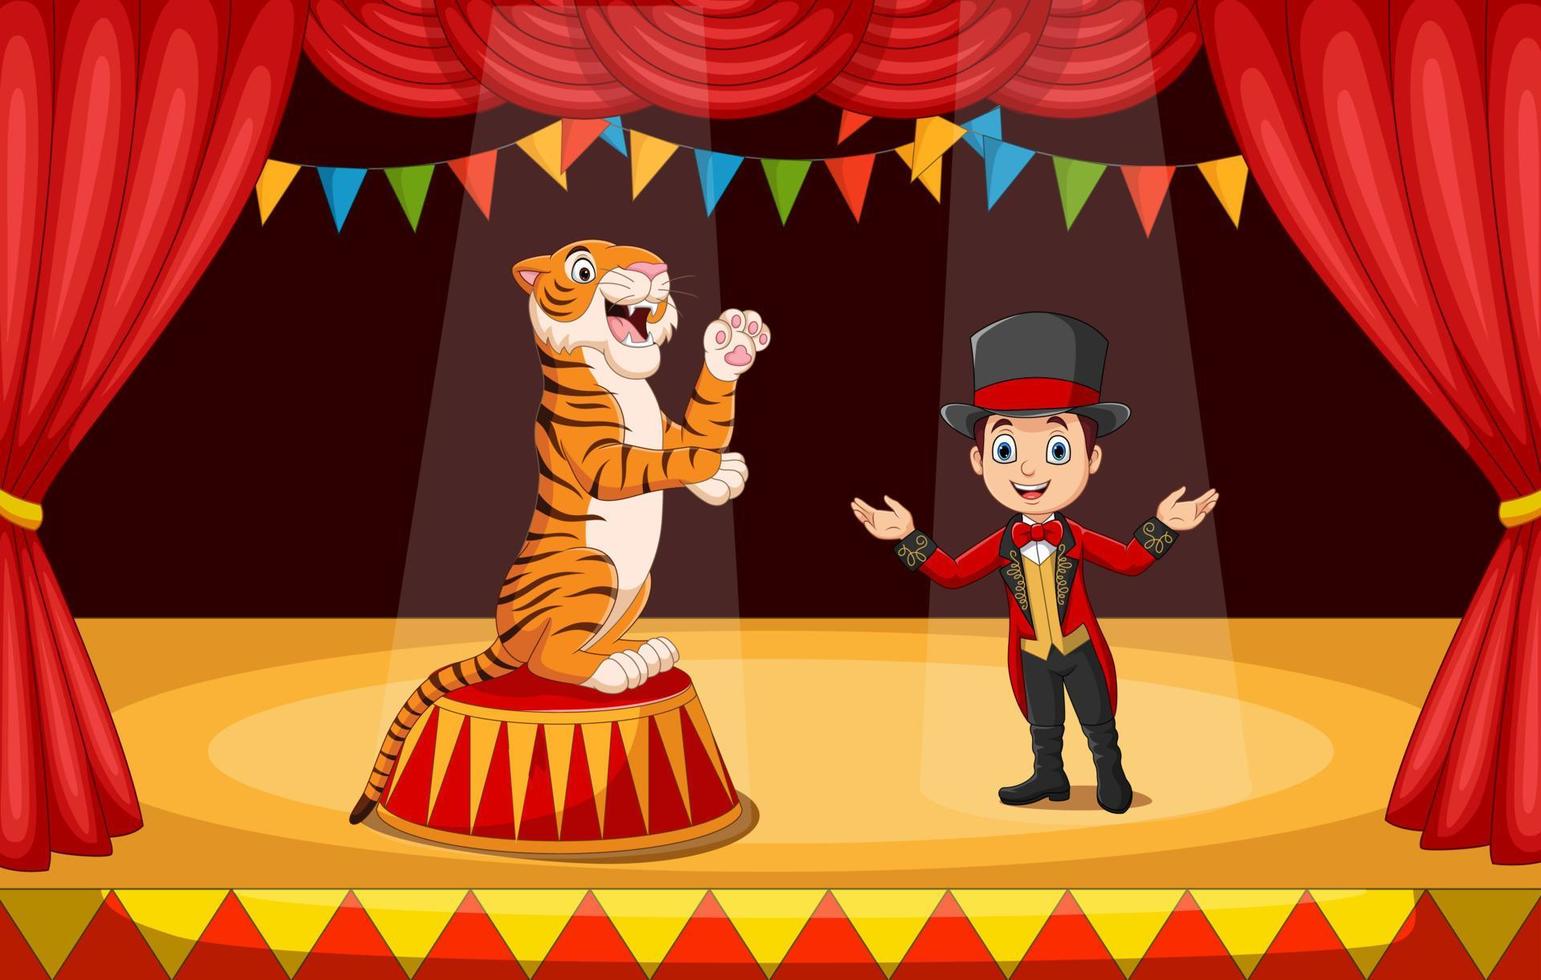 Cartoon circus tamer with tiger on stage vector